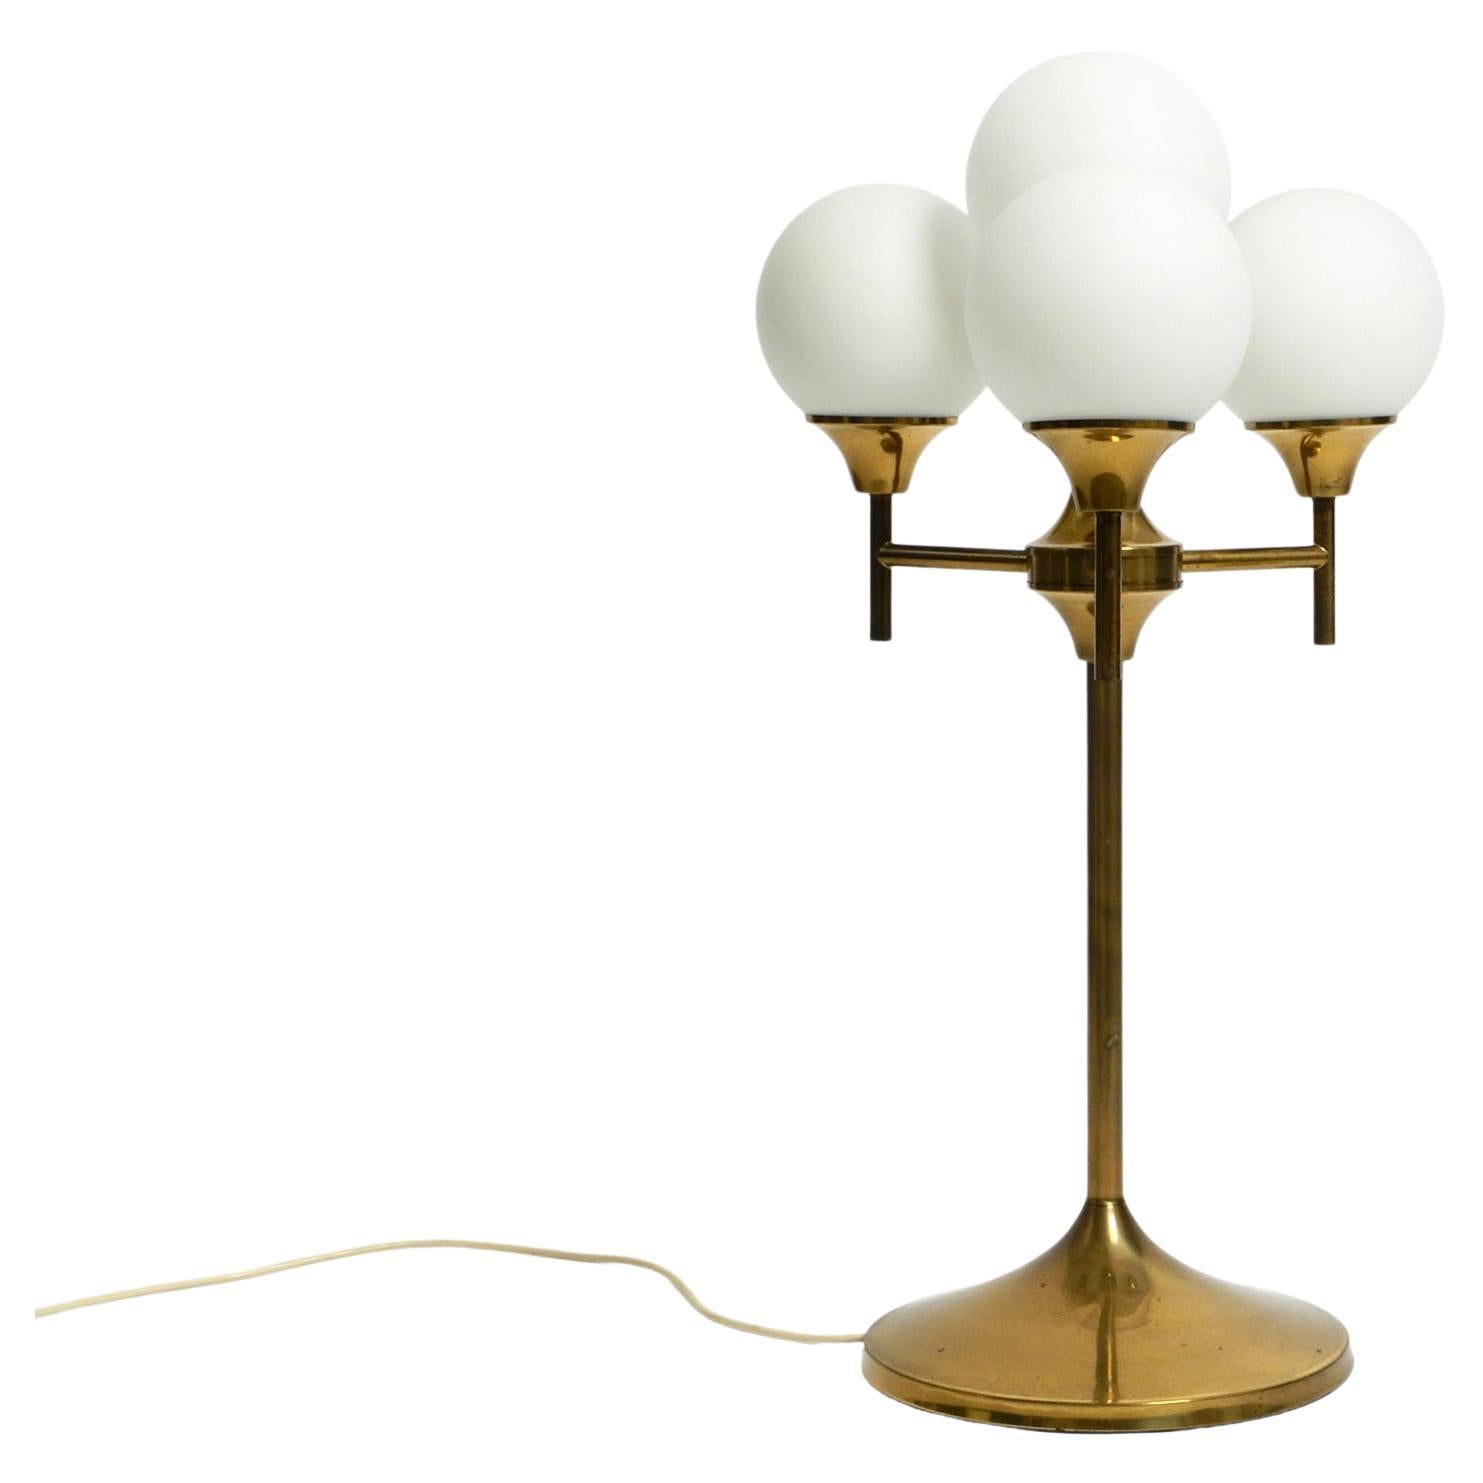 Large 1960s brass table or floor lamp with 4 glass spheres by Kaiser Leuchten For Sale